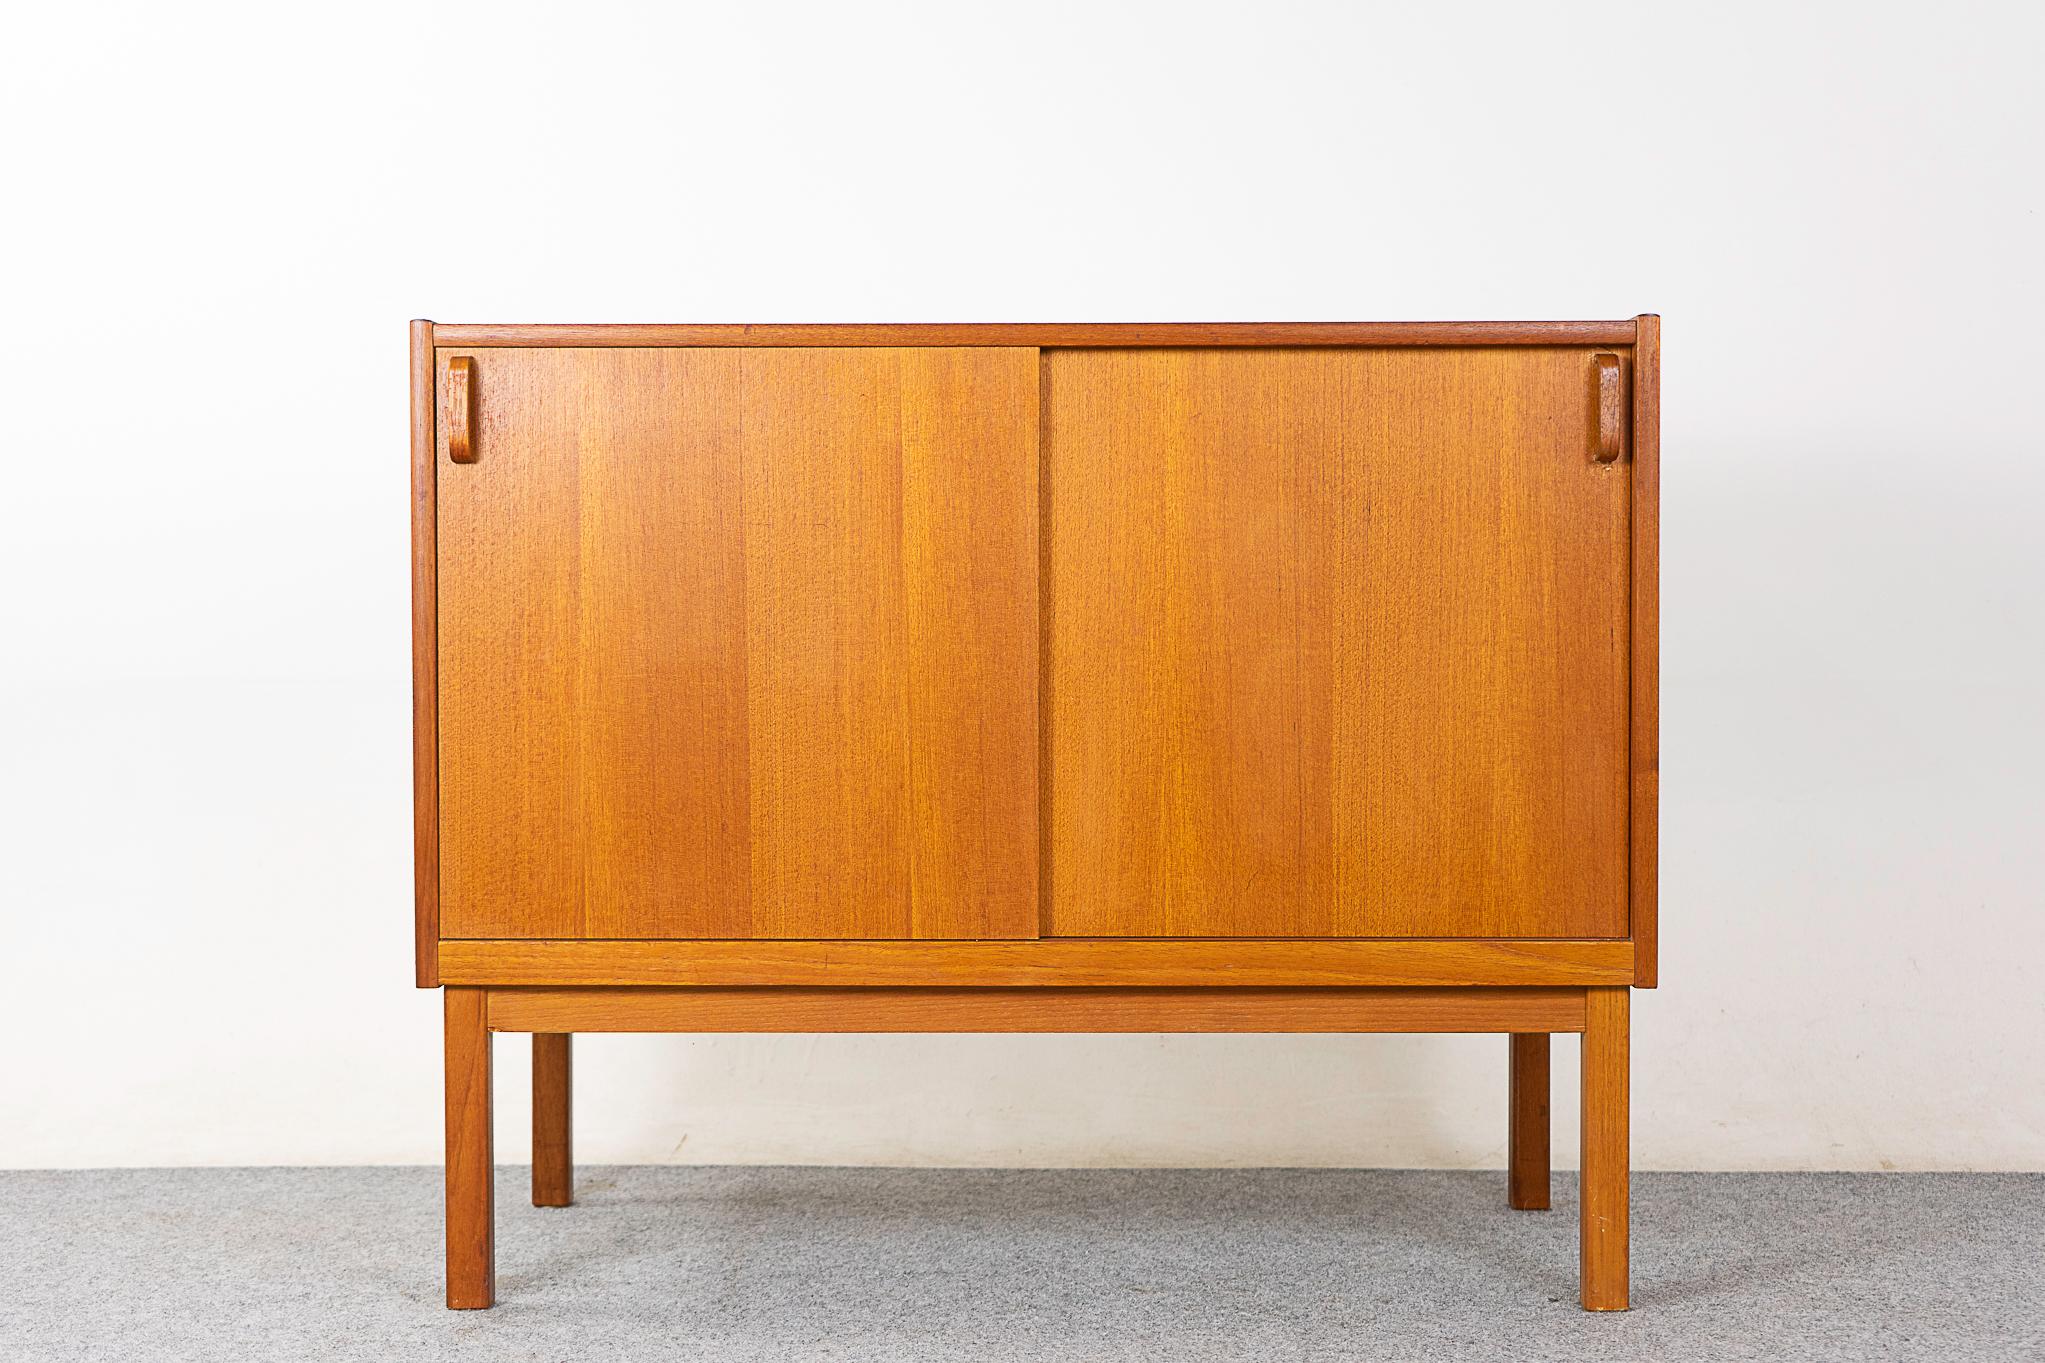 Teak mid-century cabinet, circa 1960's. Clean, simple lined design highlights the exceptional book-matched veneer throughout, removable shelf and interior drawer.